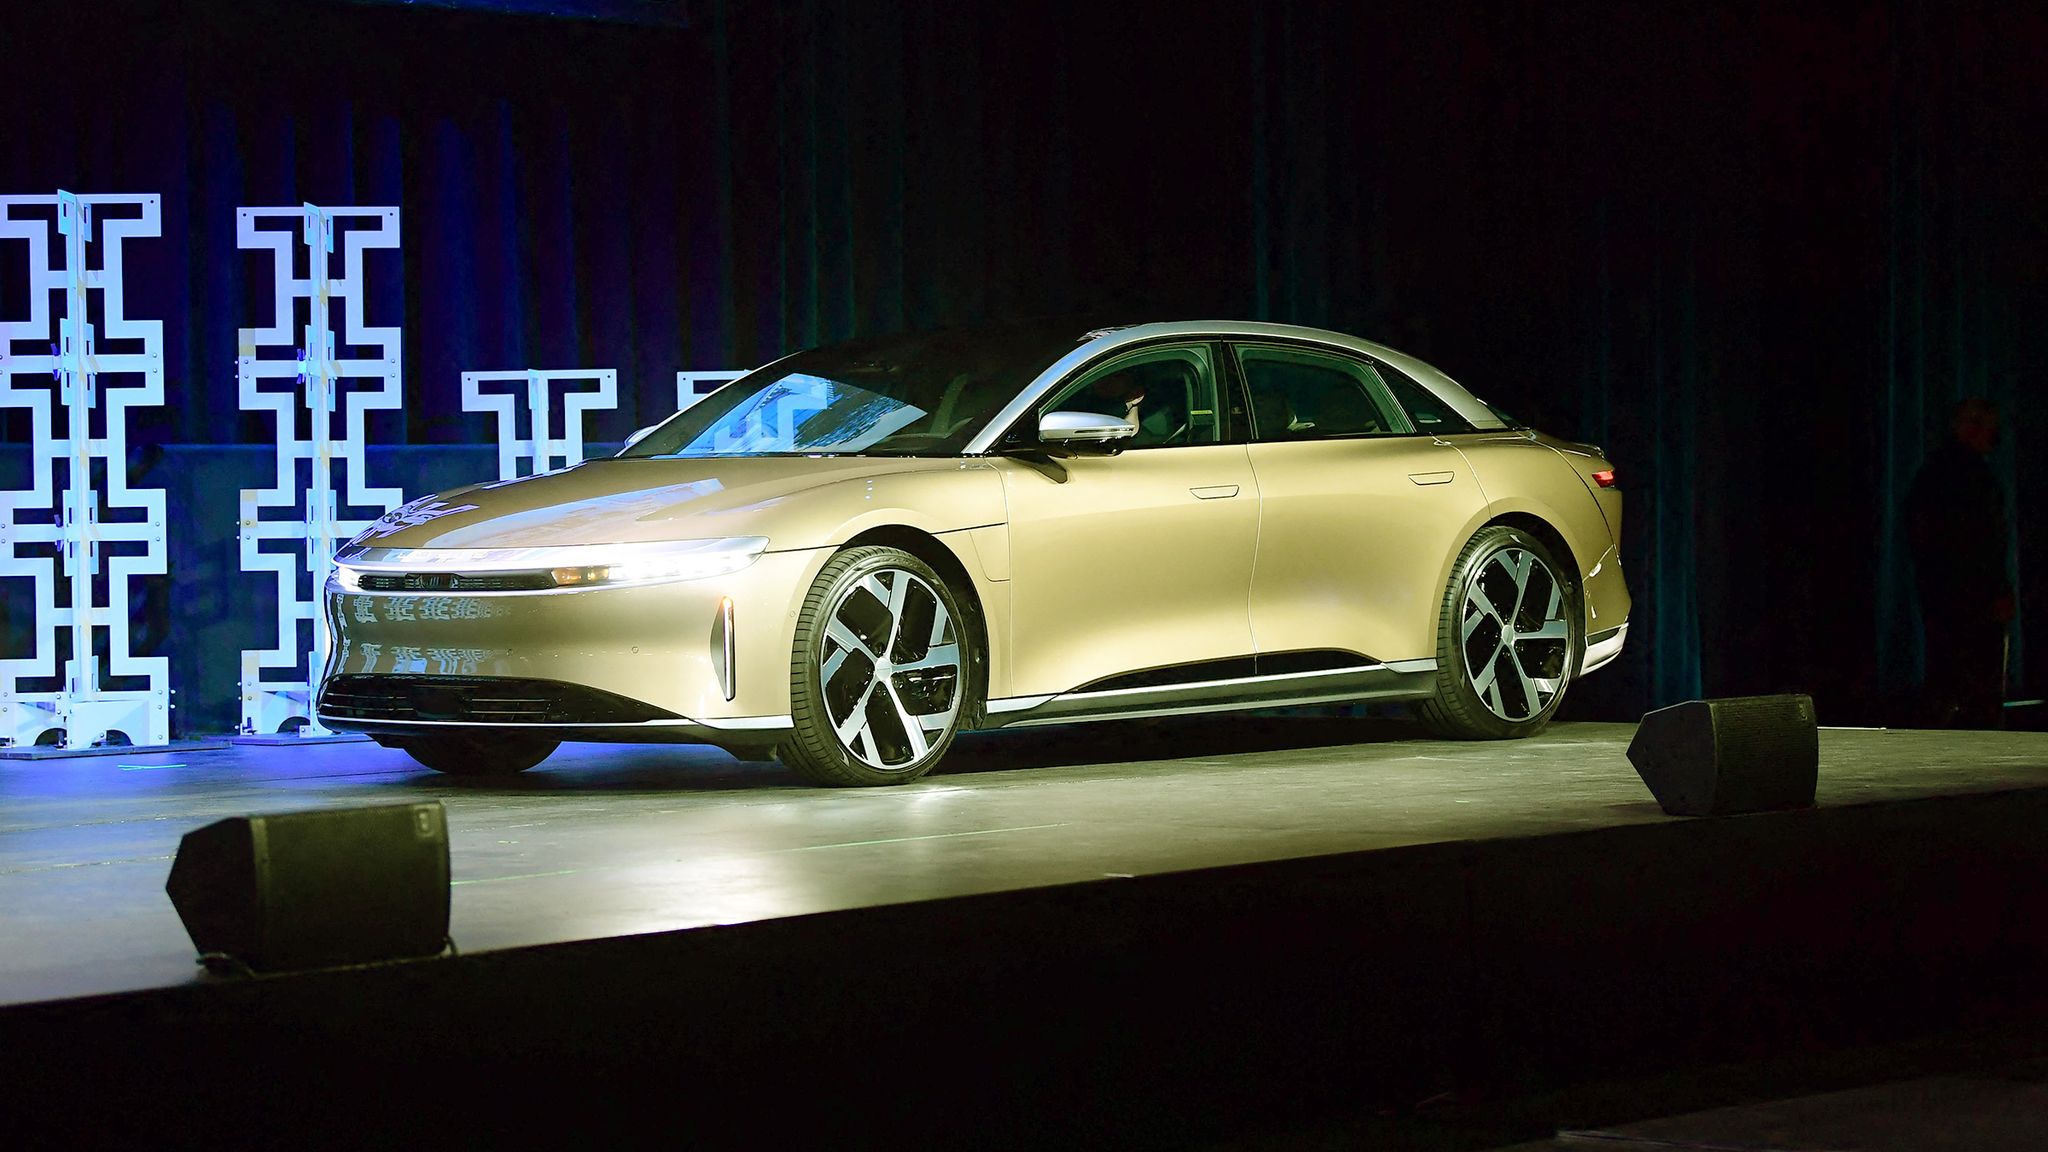 Car makers' electric vehicle plans — a brand-by-brand guide (updated)